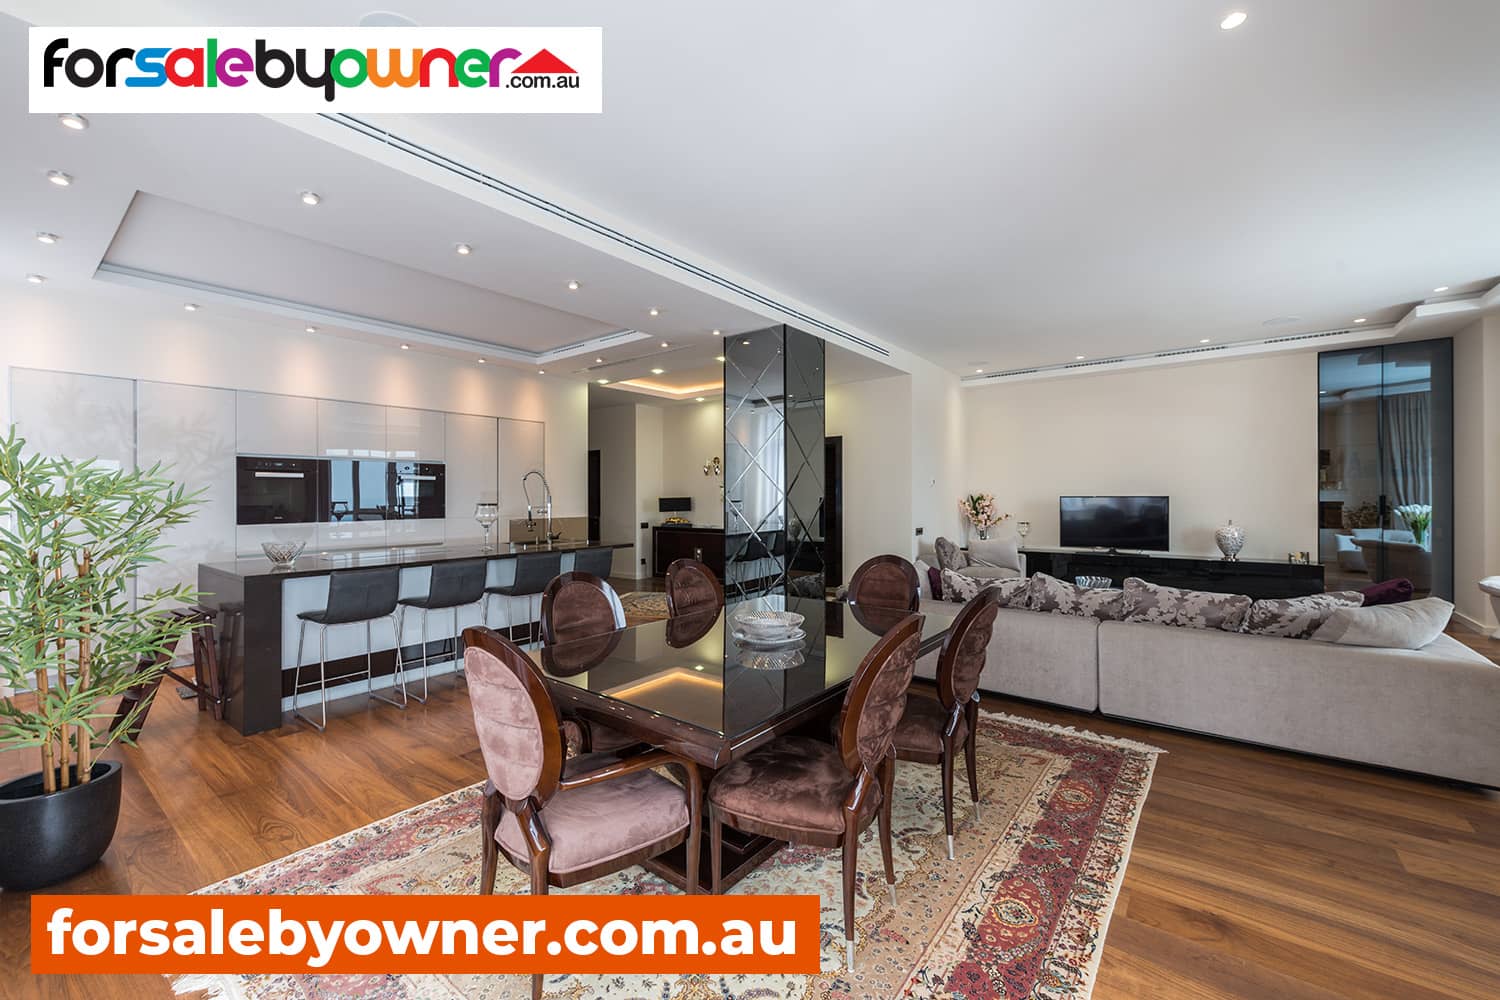 For Sale By Owner ACT | Sell My House Australian Capital Territory